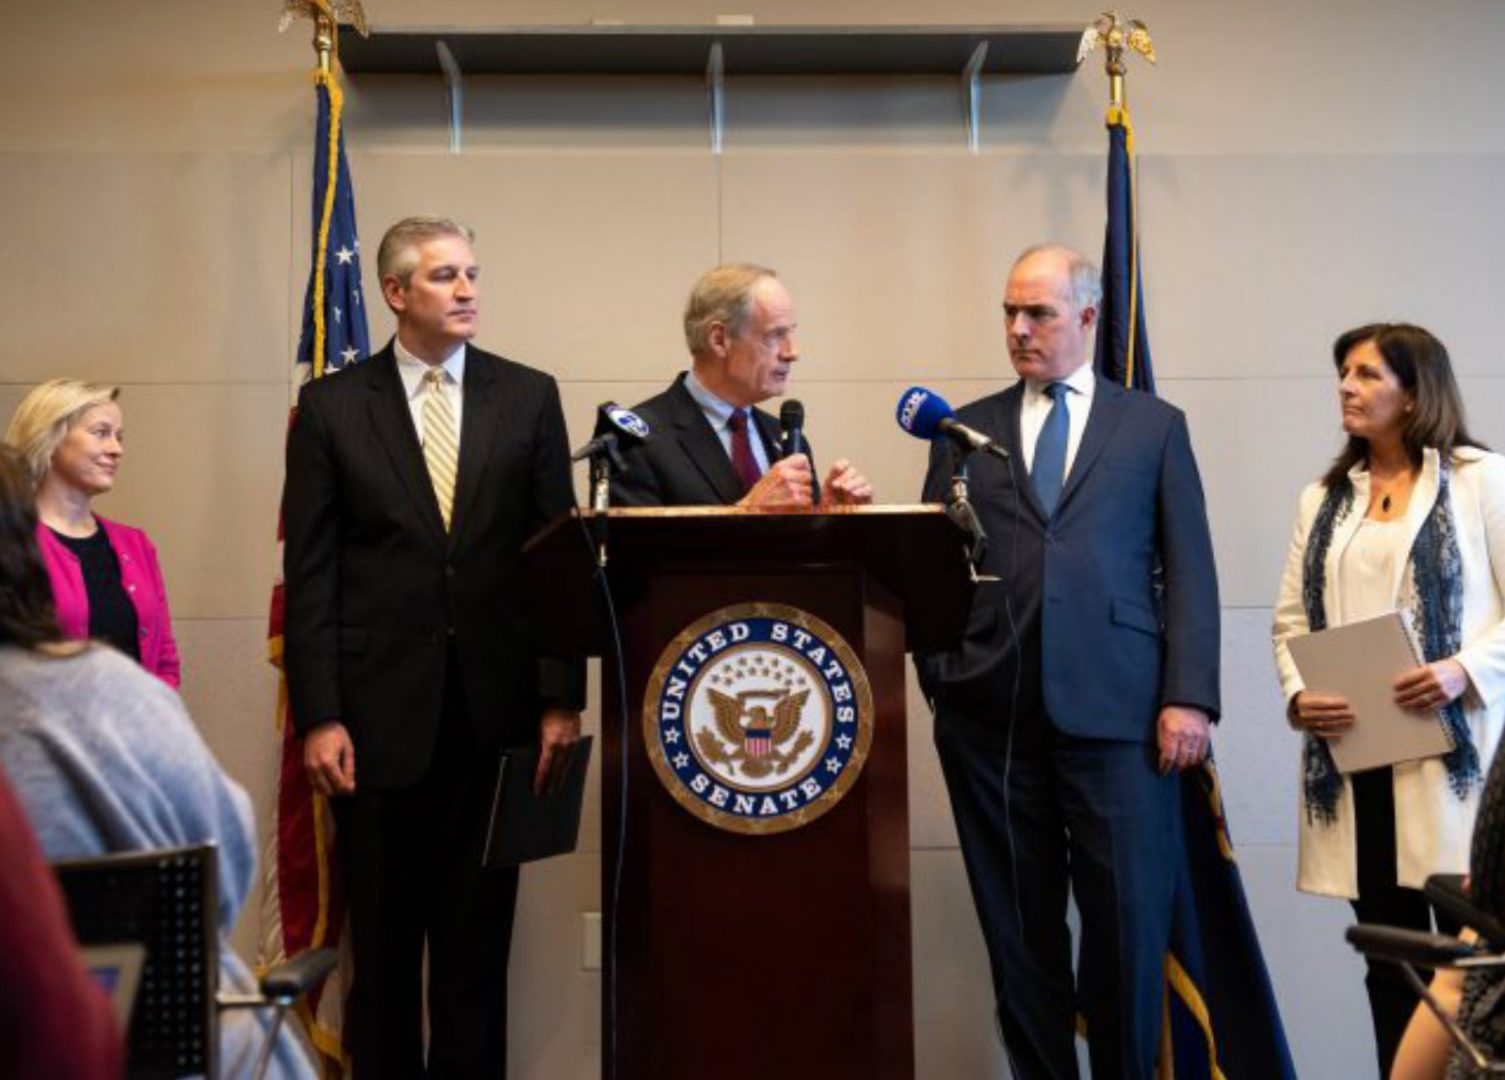 In a news conference, Del. Sen. Tom Carper, alongside Pa. Sen. Bob Casey, discusses measures pushing for a federal response to PFAS chemical contamination, following a roundtable discussion at the Horsham Township Library in Horsham, Pa. on Monday, April 8, 2019. 